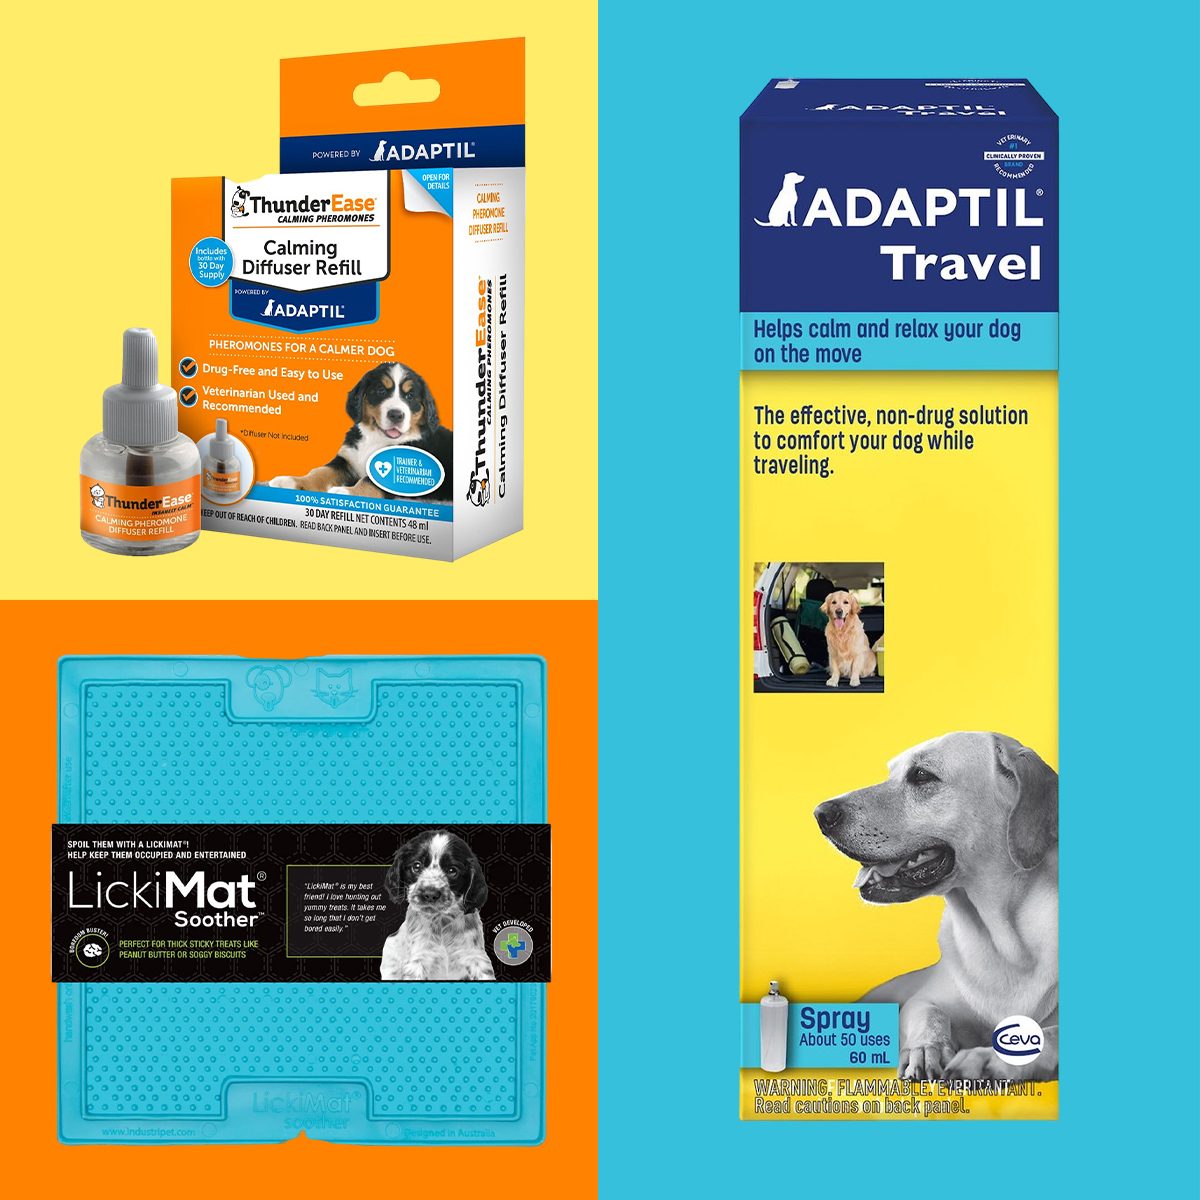 https://www.rd.com/wp-content/uploads/2020/05/11-Products-That-Could-Help-Your-Dogs-Anxiety_1_FT_via-amazon.com_.jpg